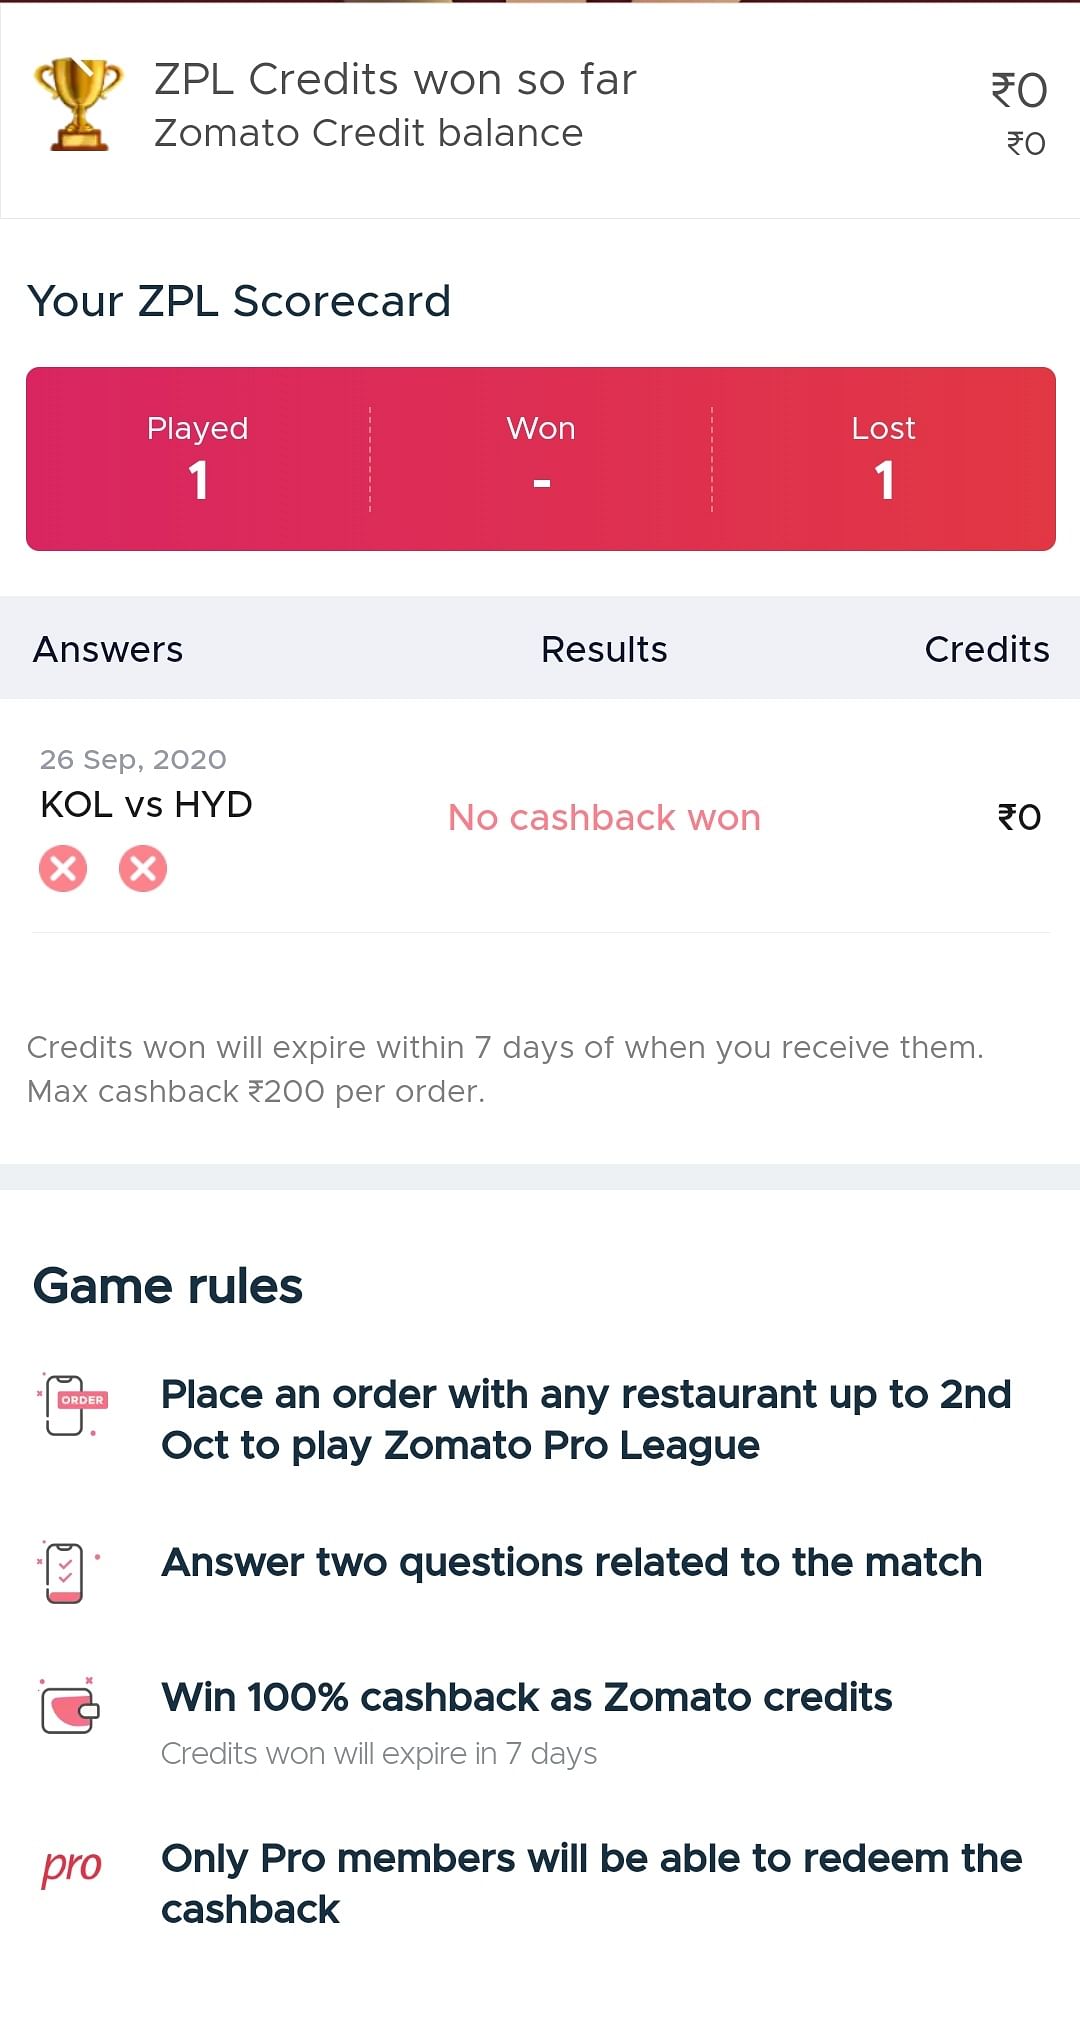 The rules of the Zomato Premier League game